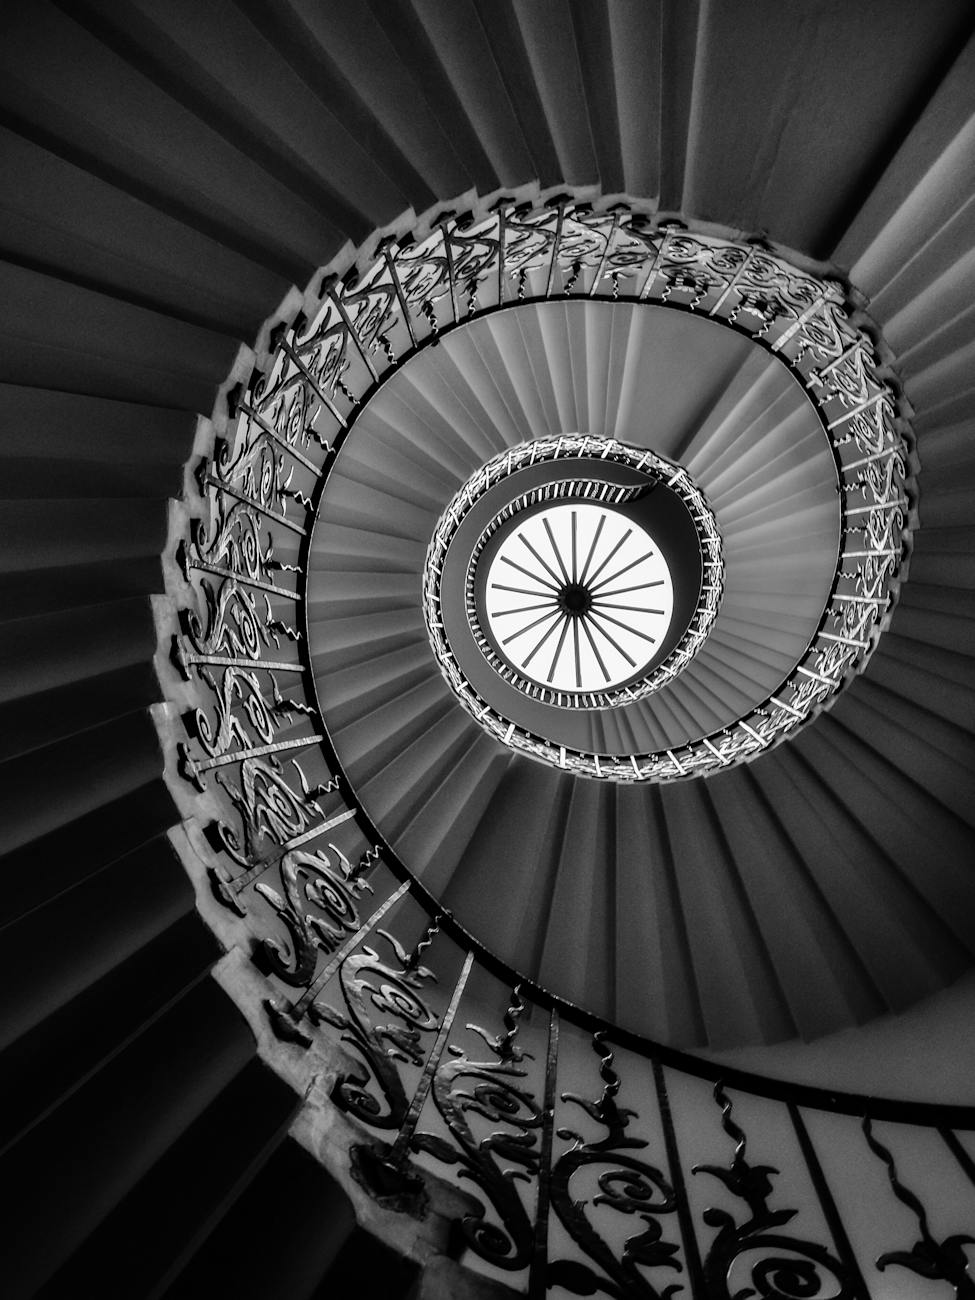 tulip twirl the architectural delight of this wonderful staircase mesmerised me quite popular in the list of travellers to london therefore it was awfully difficult for me to find the